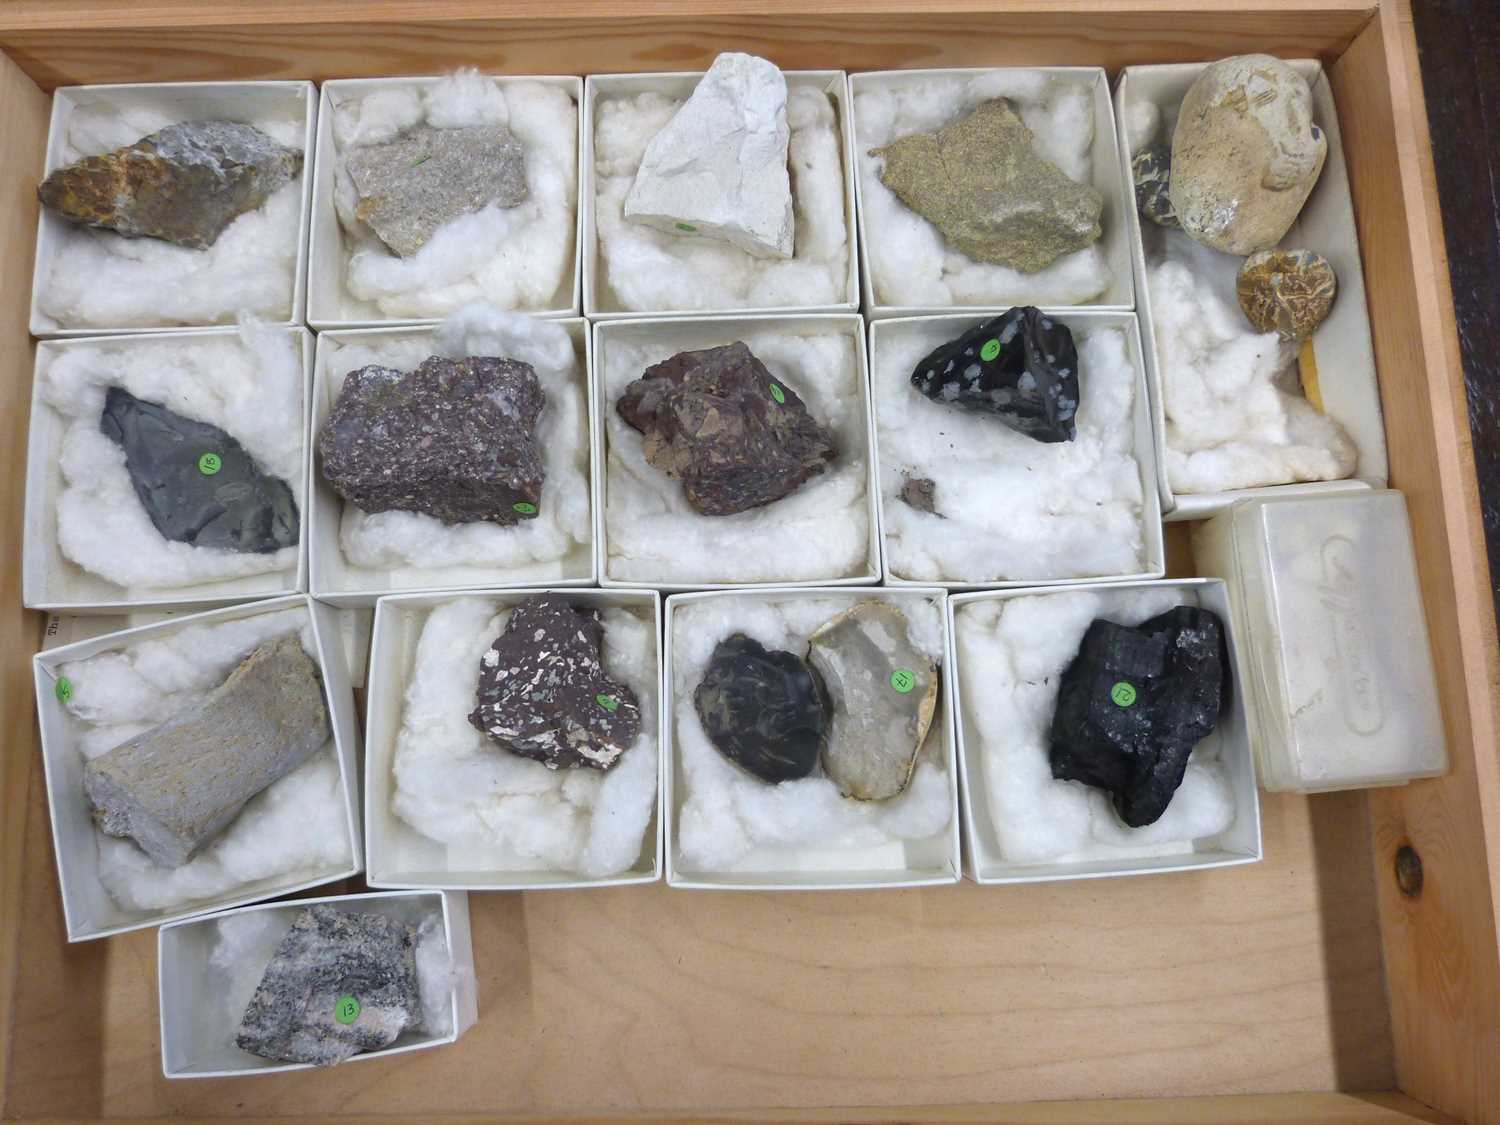 Collection of mineralogical and soil samples housed in wooden storage boxes - Image 10 of 12